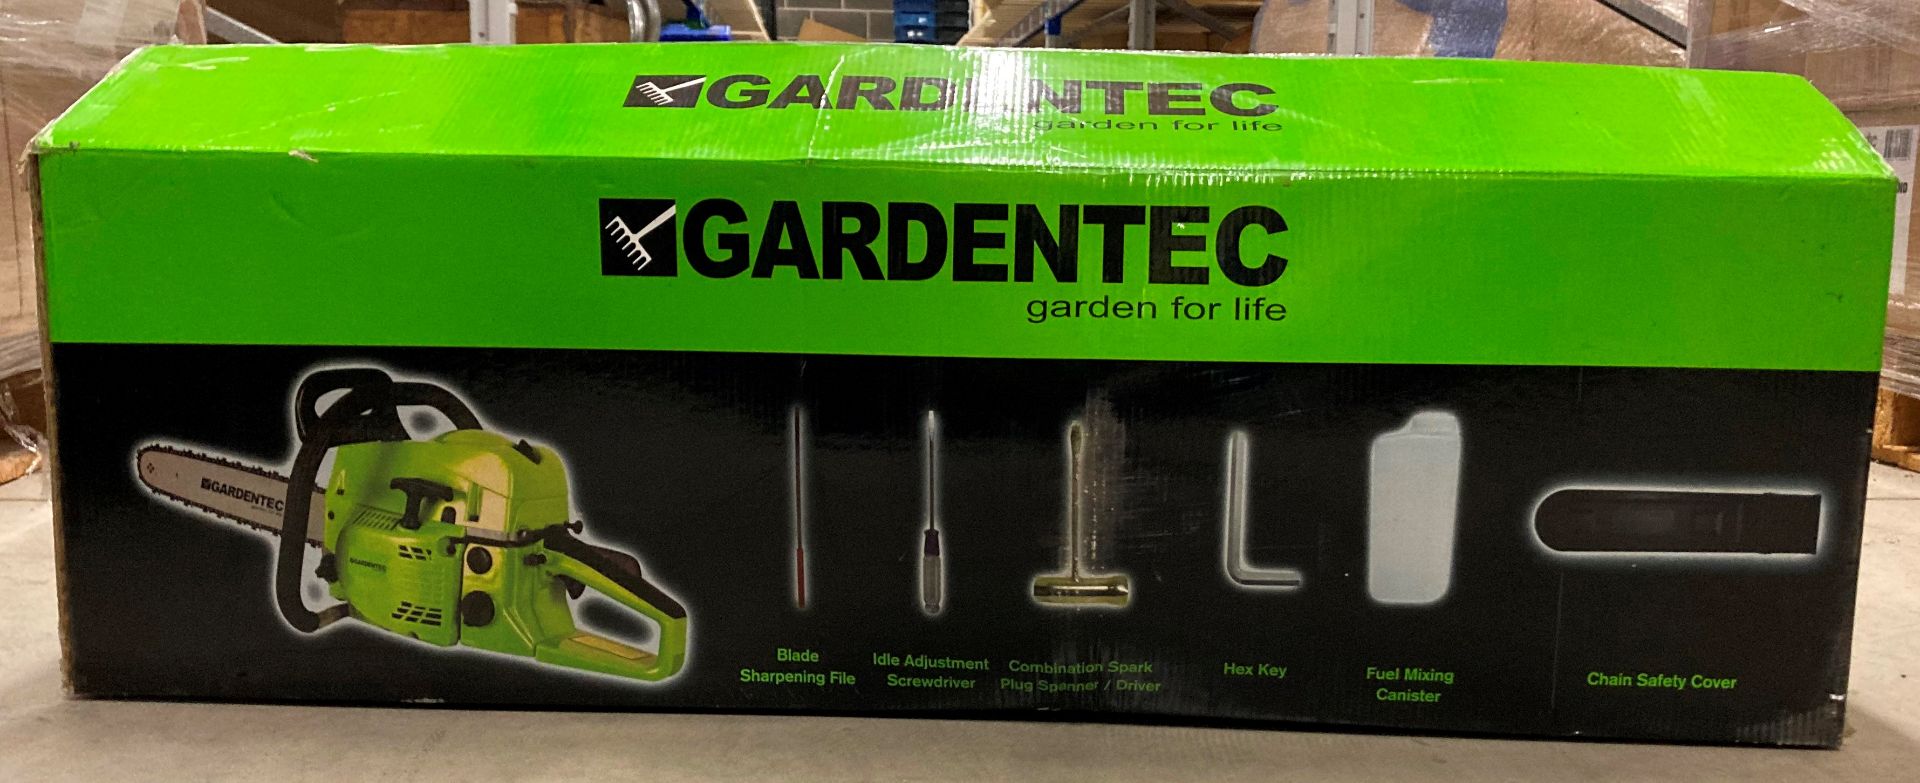 A GardenTec petrol driven chainsaw model no: 542076 boxed - appears unused (L08)